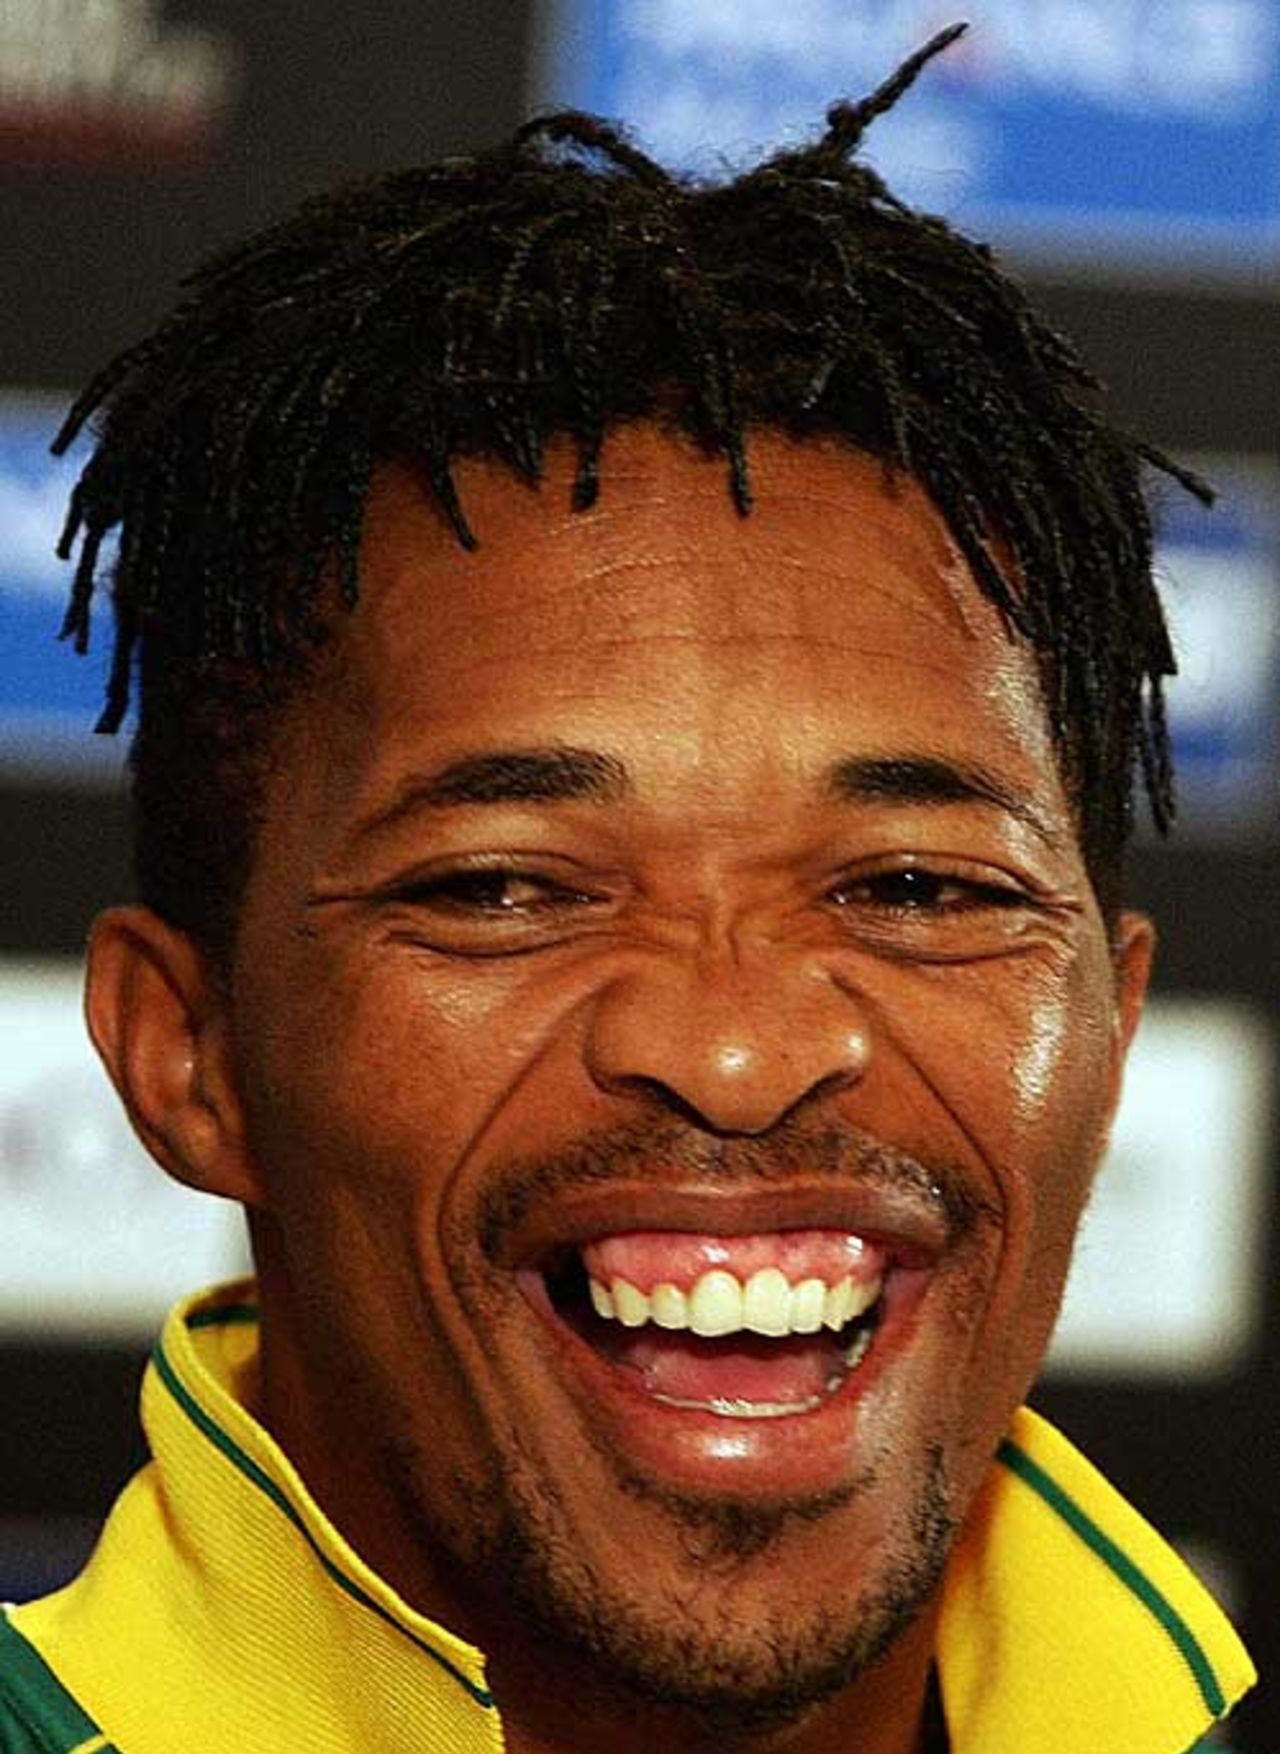 Makhaya Ntini is all smiles at a press conference, Johannesburg, September 5, 2007